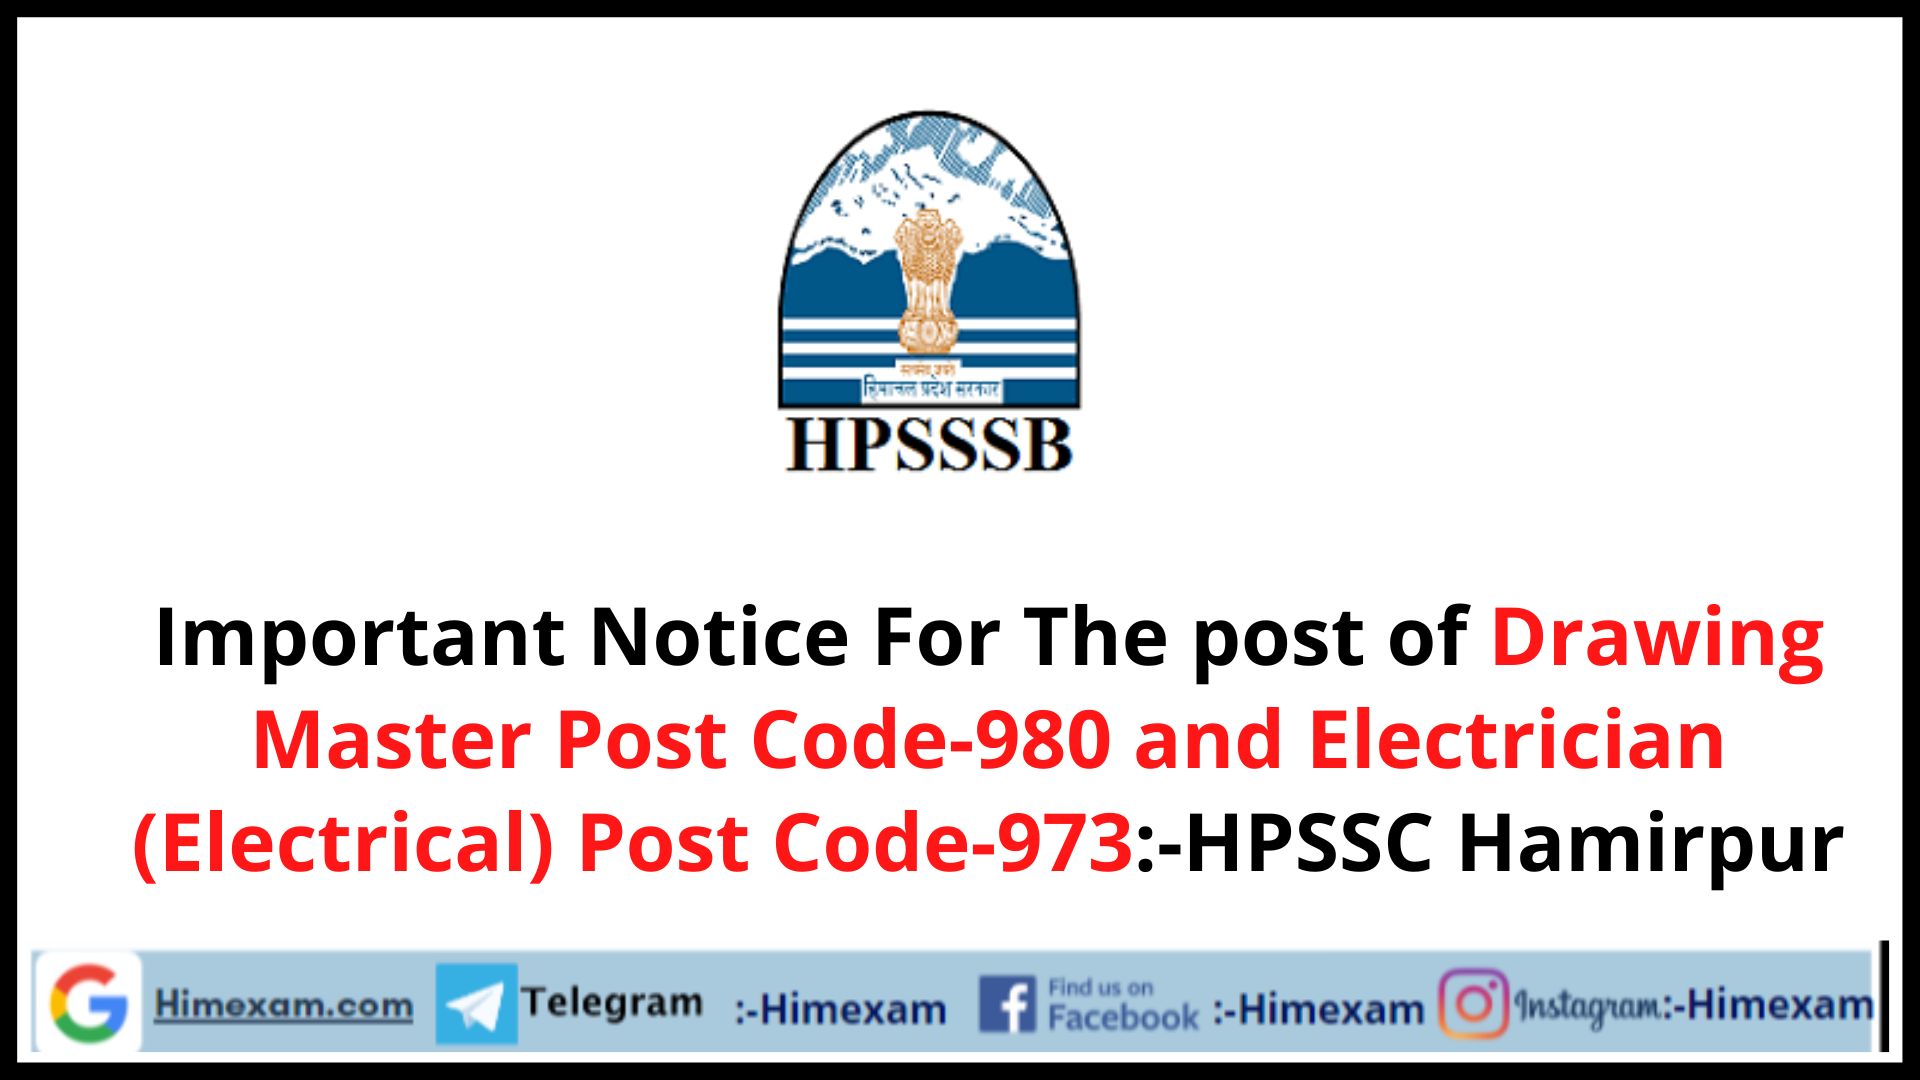 Important Notice For The post of Drawing Master Post Code-980 and Electrician (Electrical) Post Code-973:-HPSSC Hamirpur